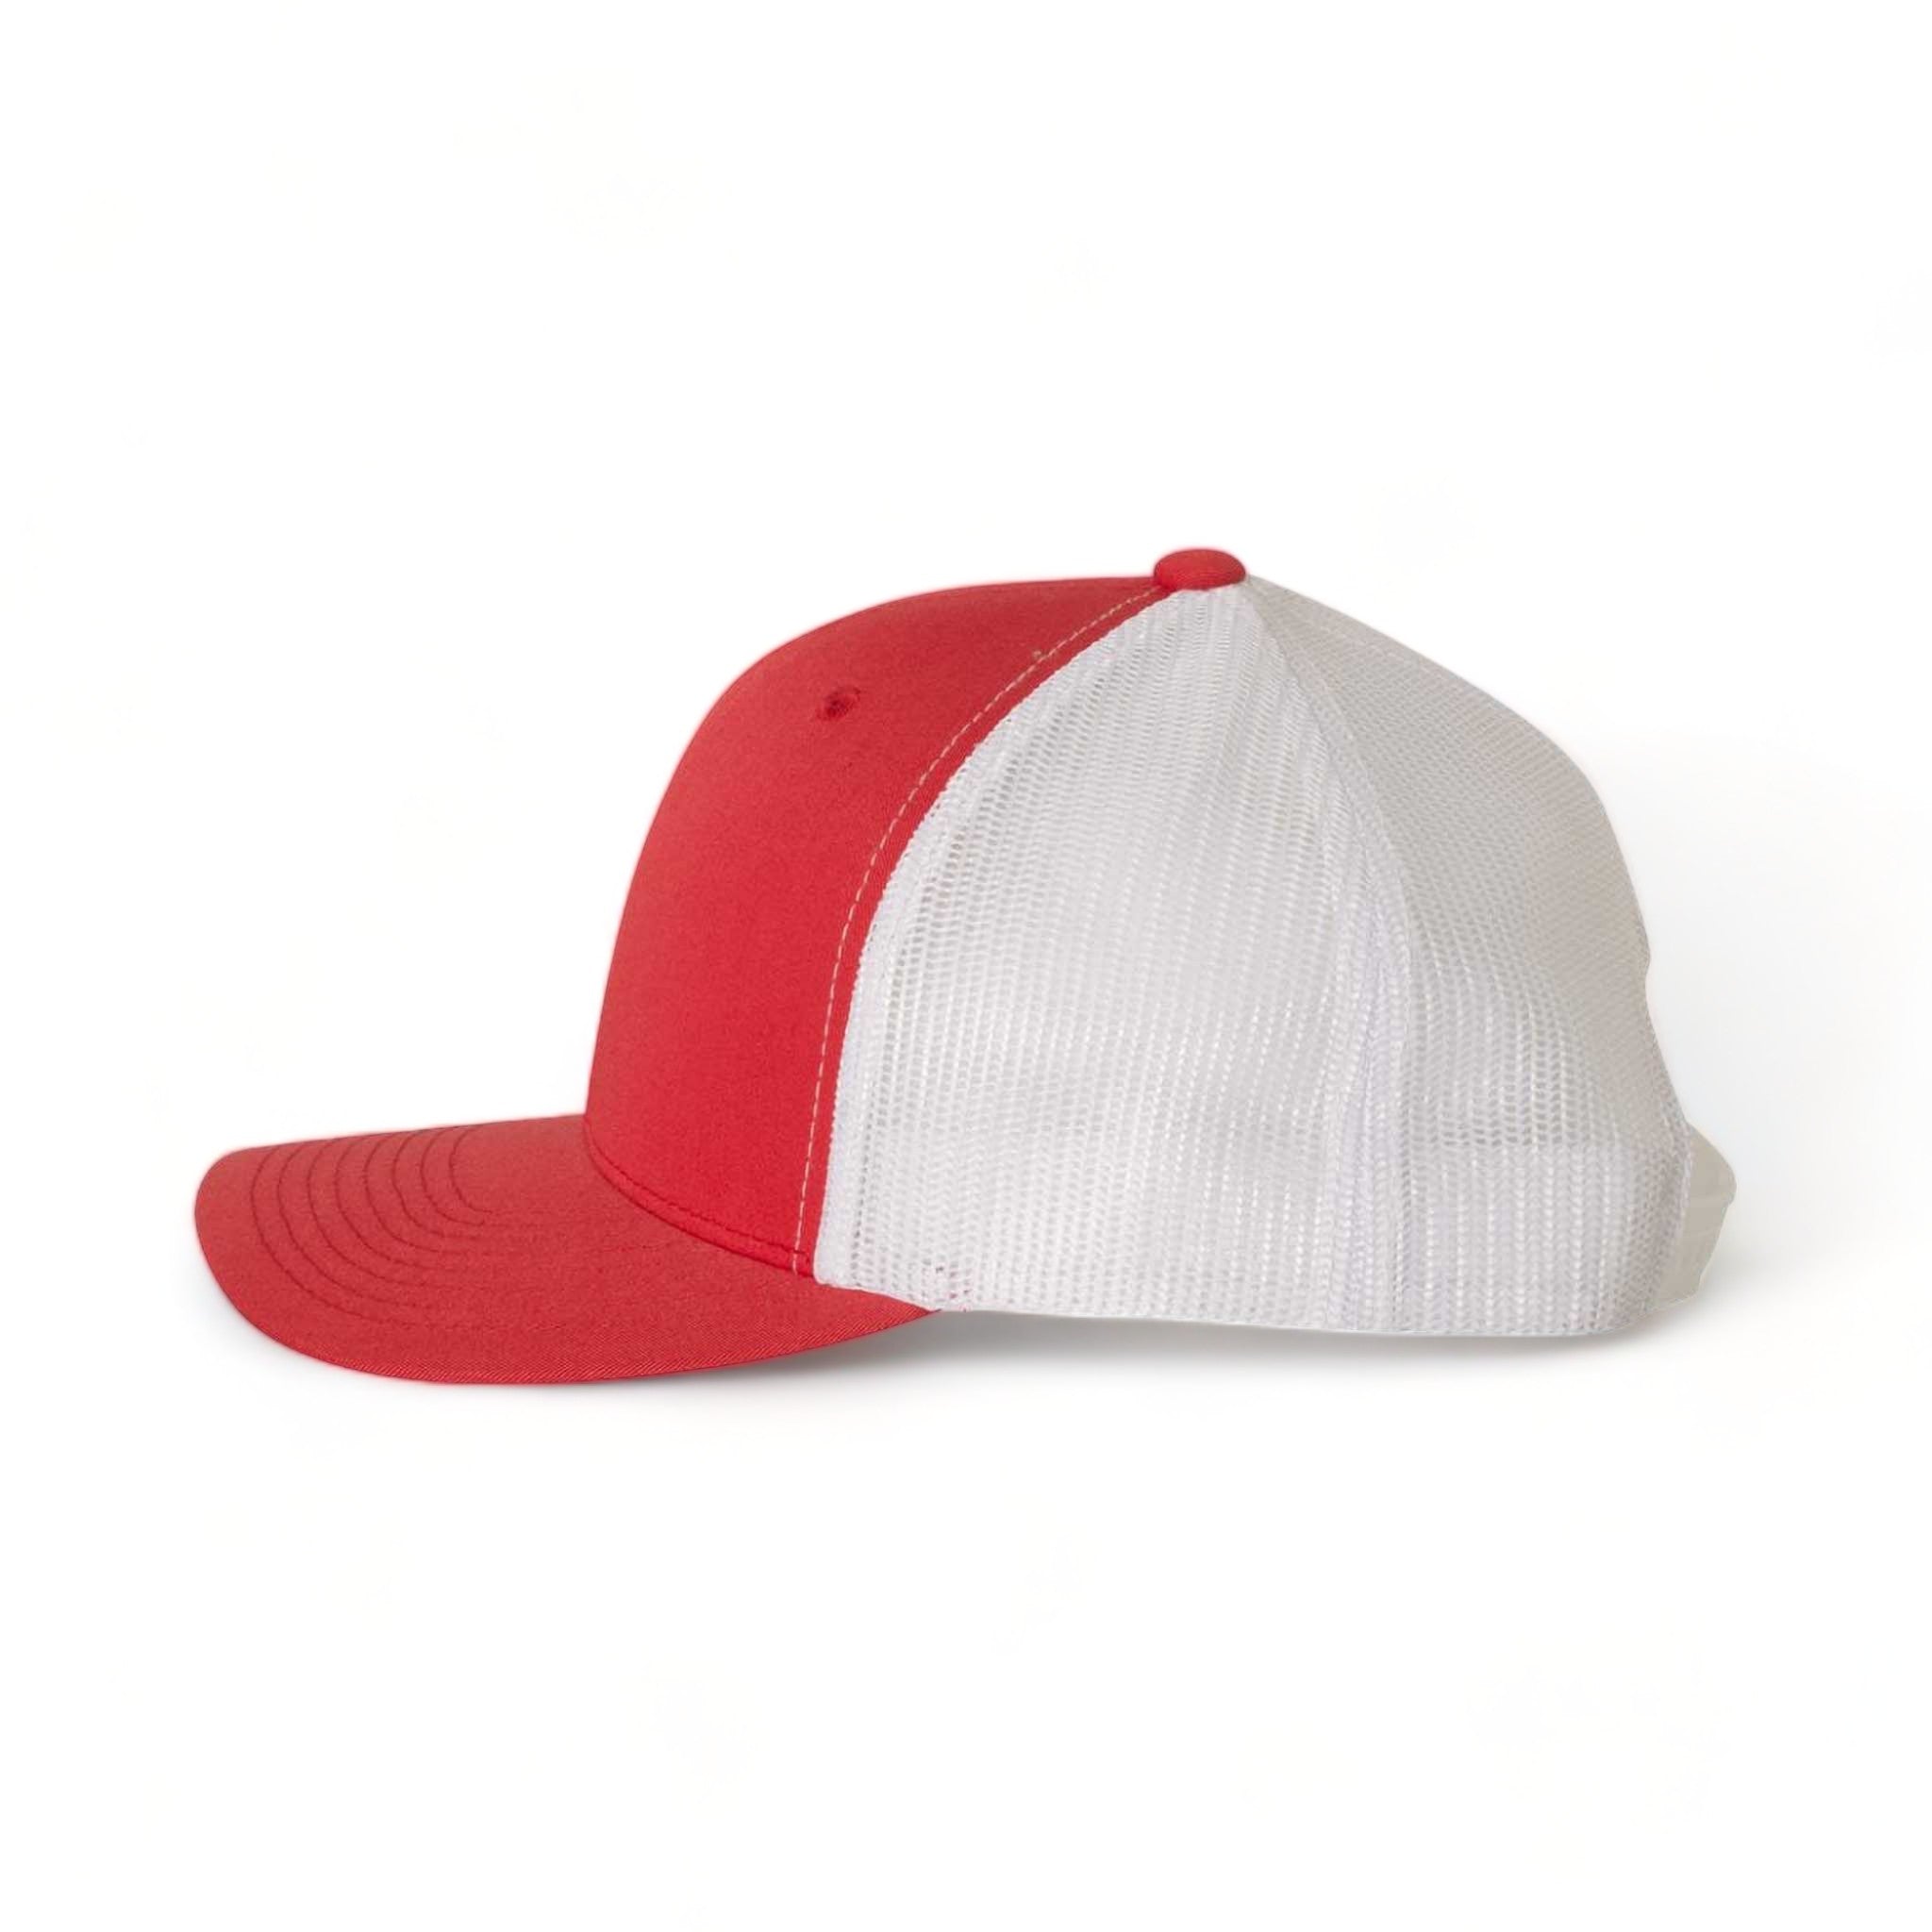 Side view of YP Classics 6606 custom hat in red and white